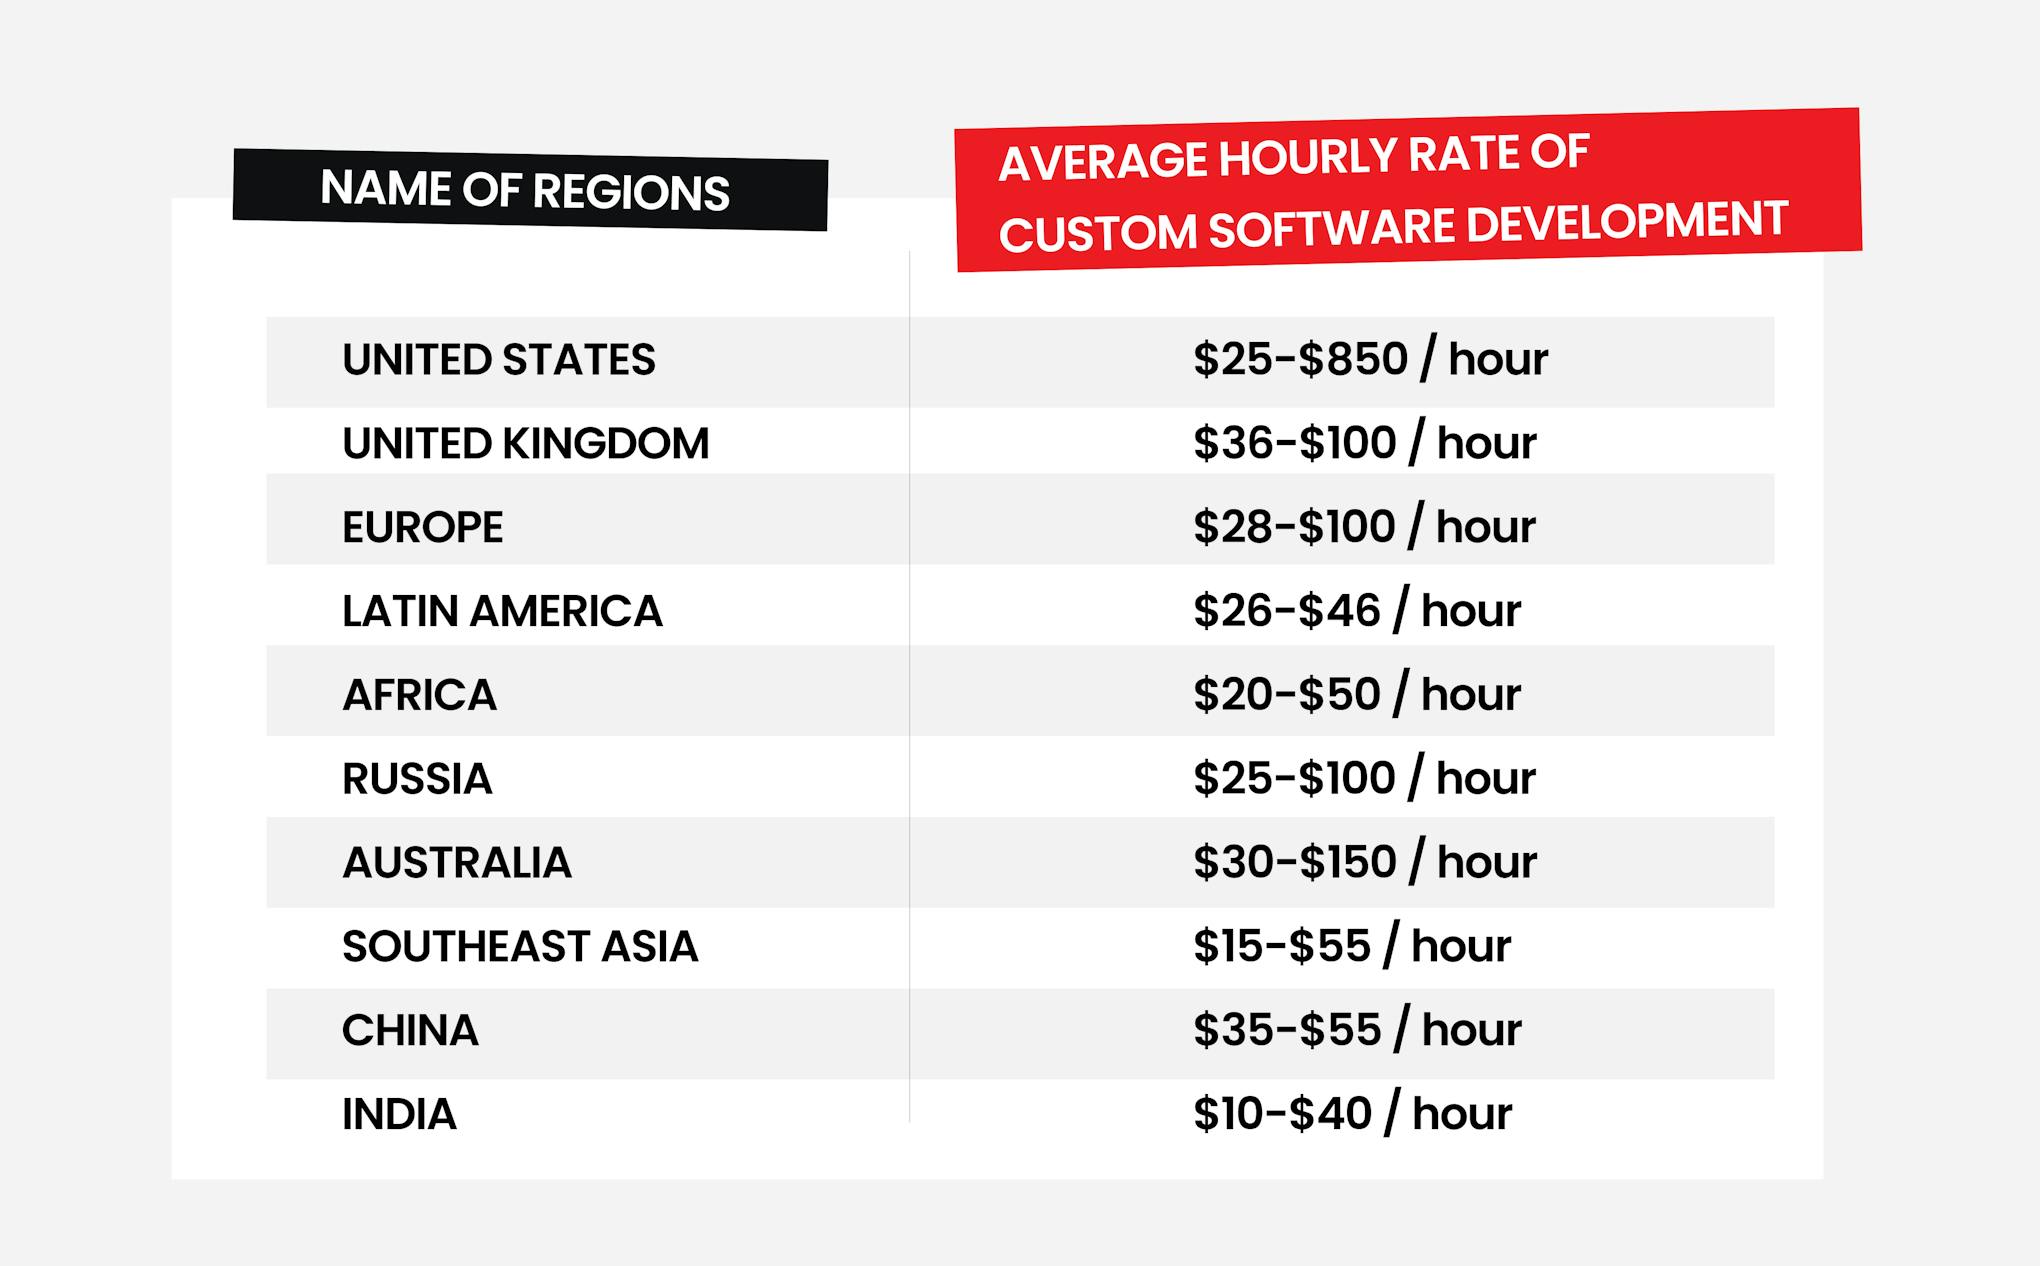 How much does custom software development cost per hour?